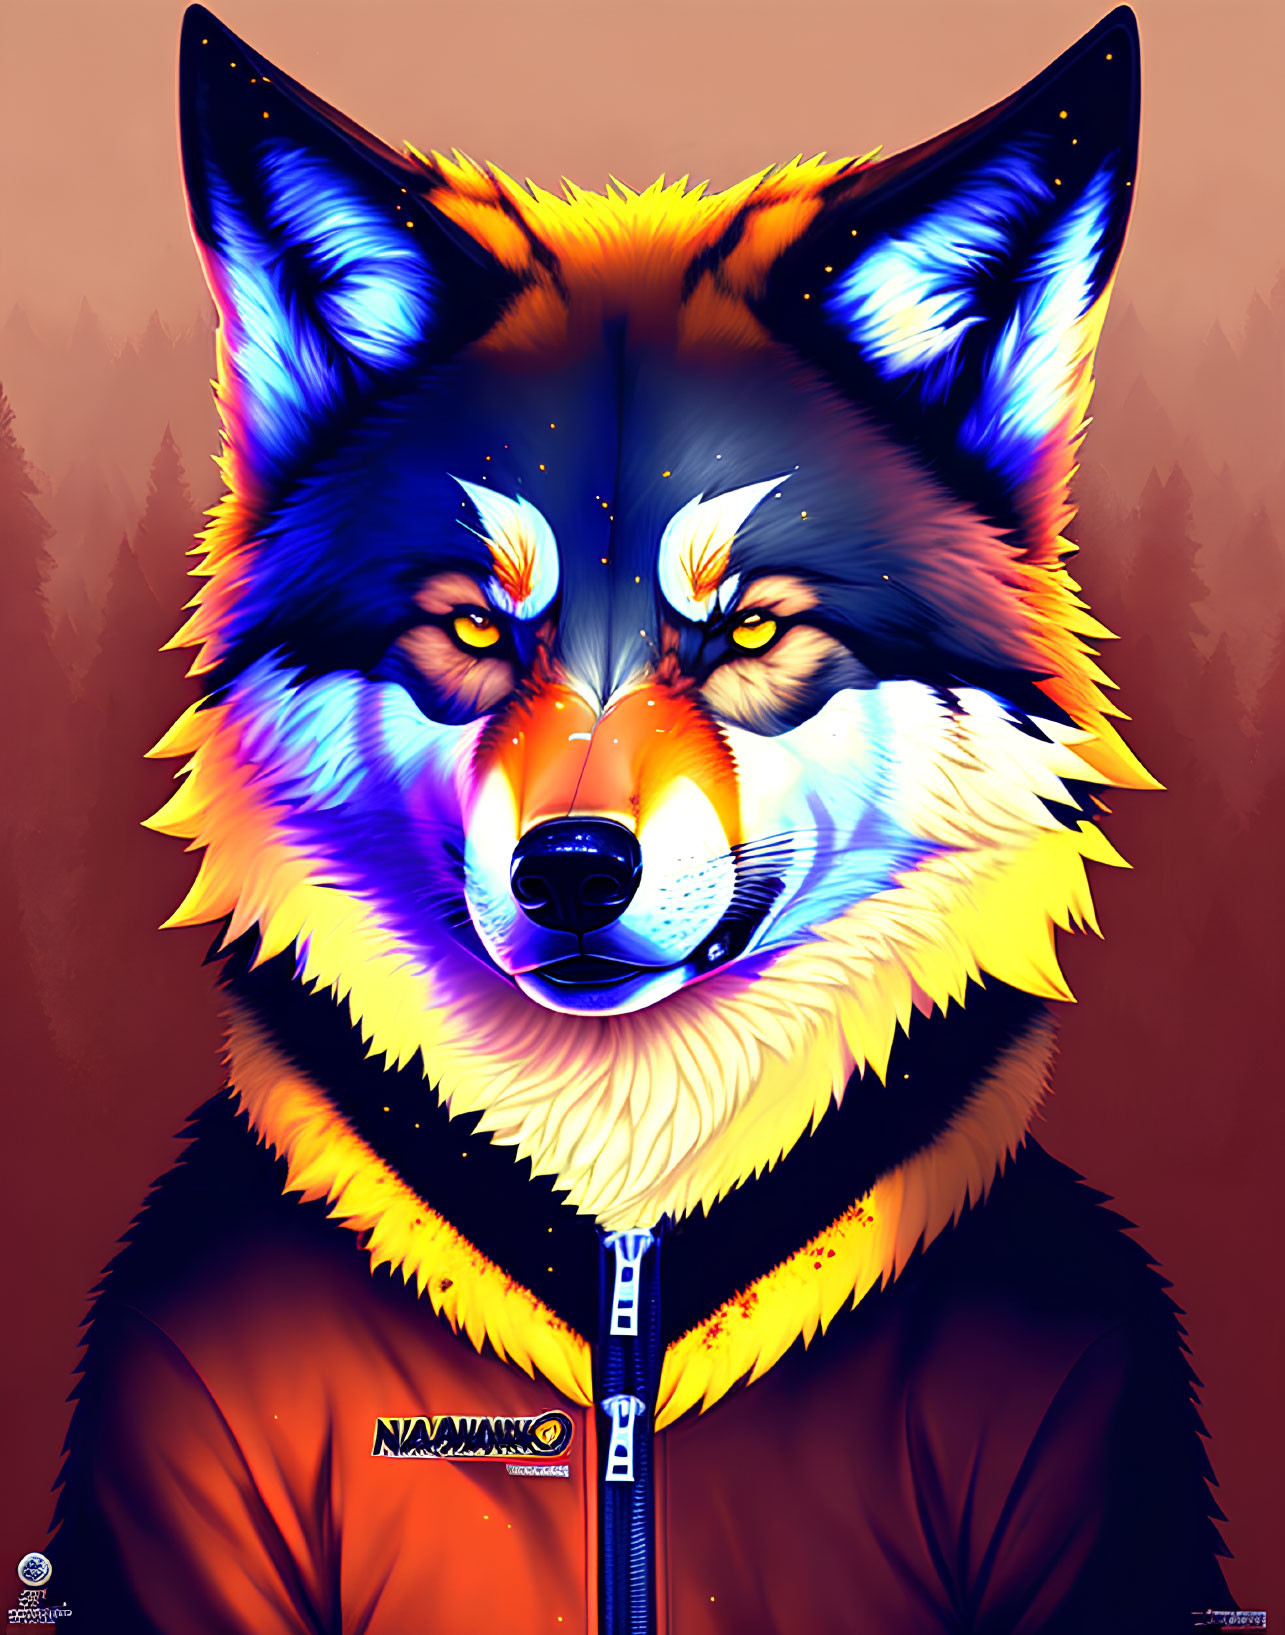 Colorful Stylized Wolf in Orange Jacket Against Autumn Forest